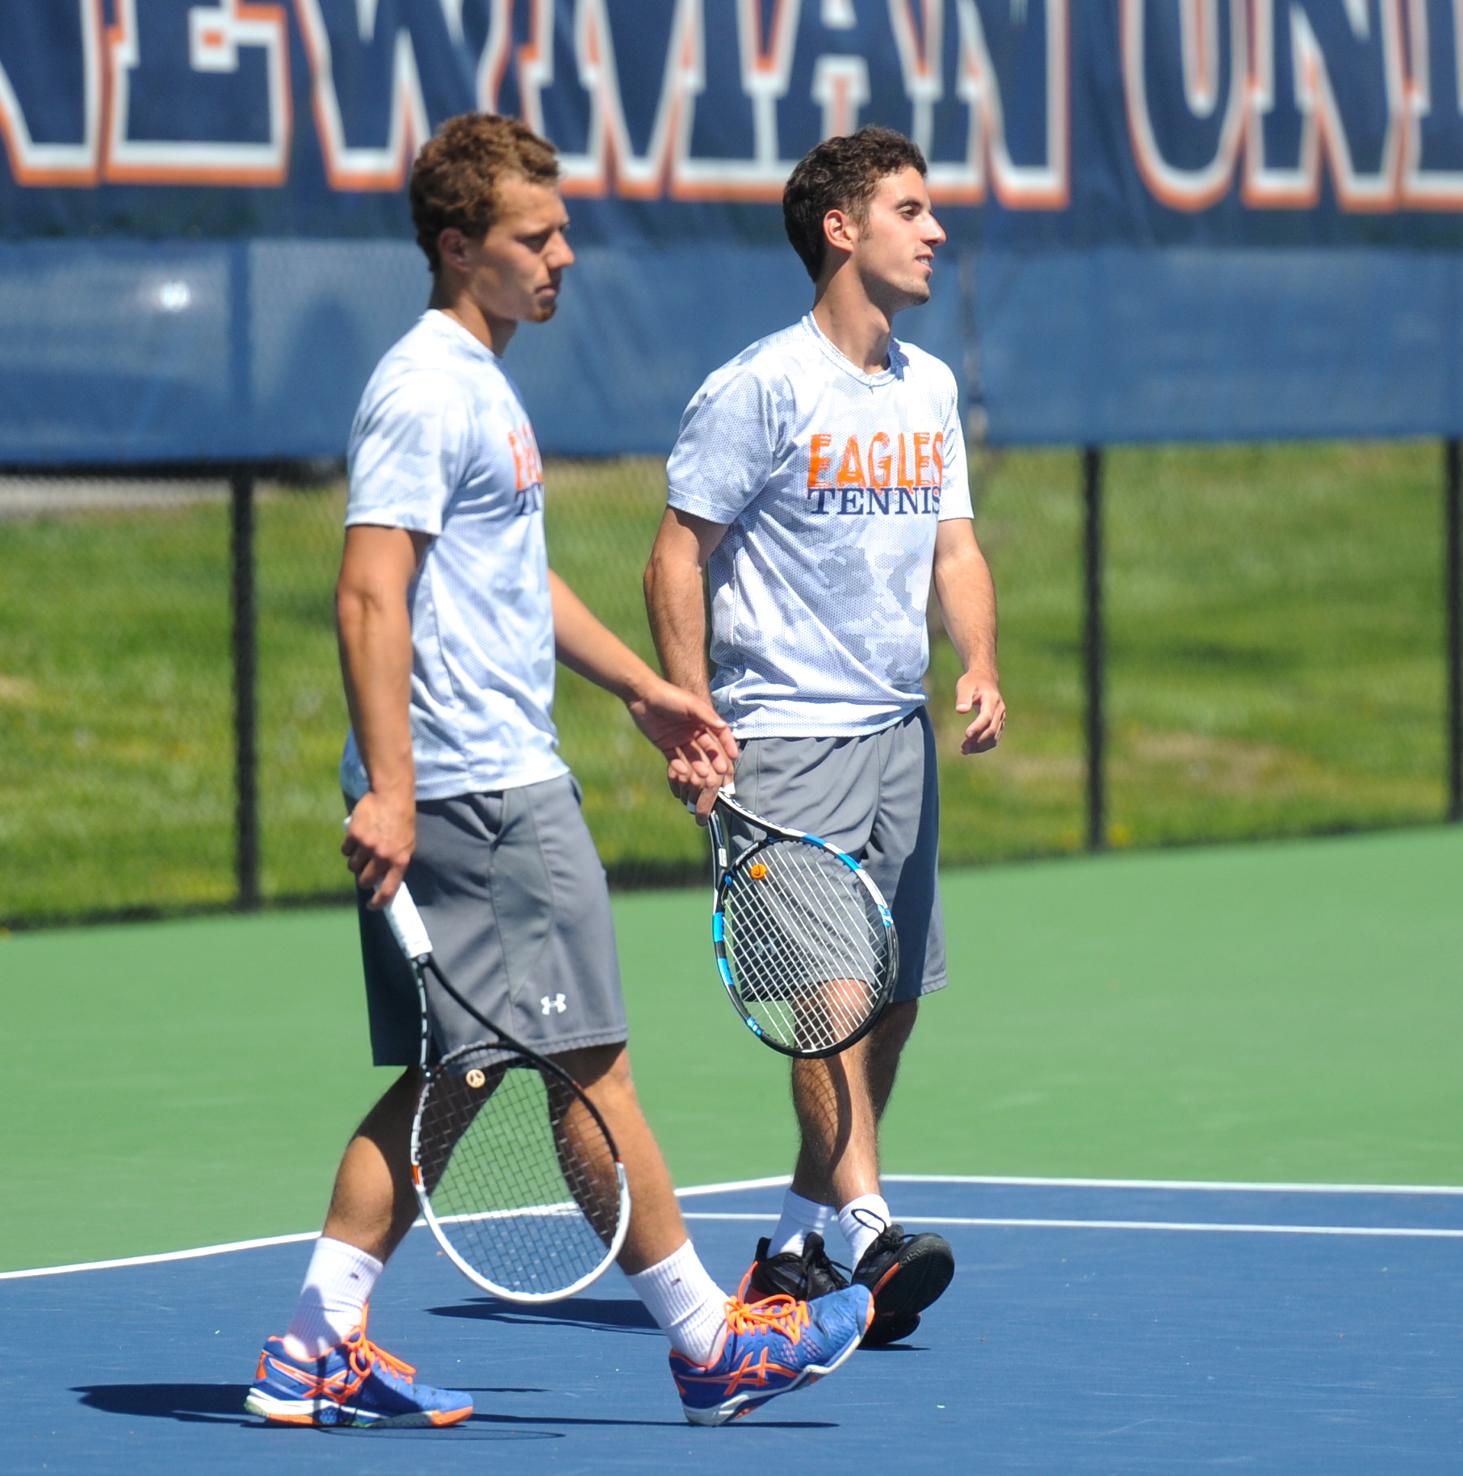 C-N Men's Tennis team travels to the University of the Cumberlands Tournament